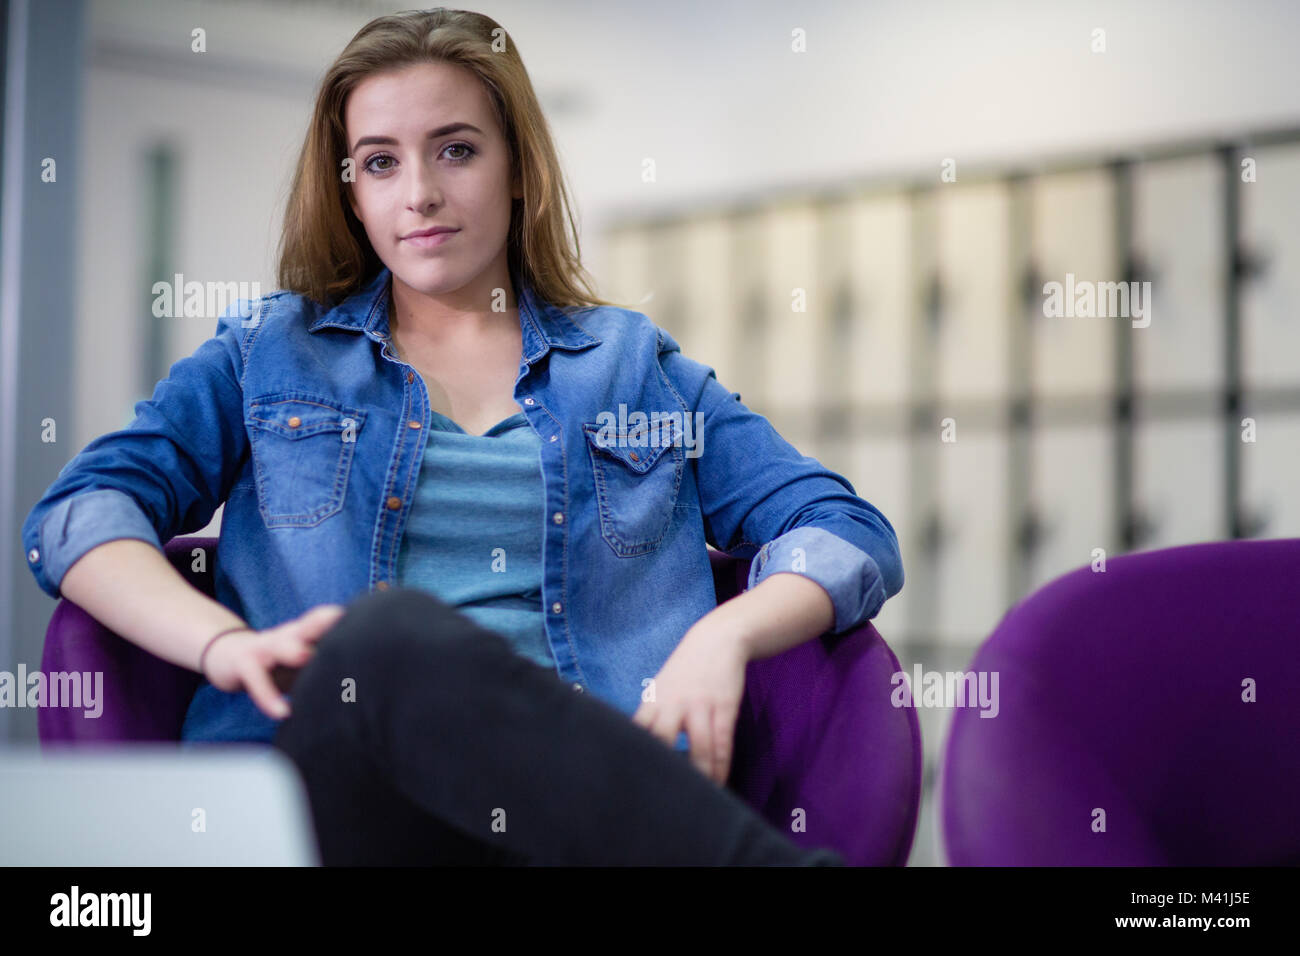 Portrait of a female student at college Stock Photo